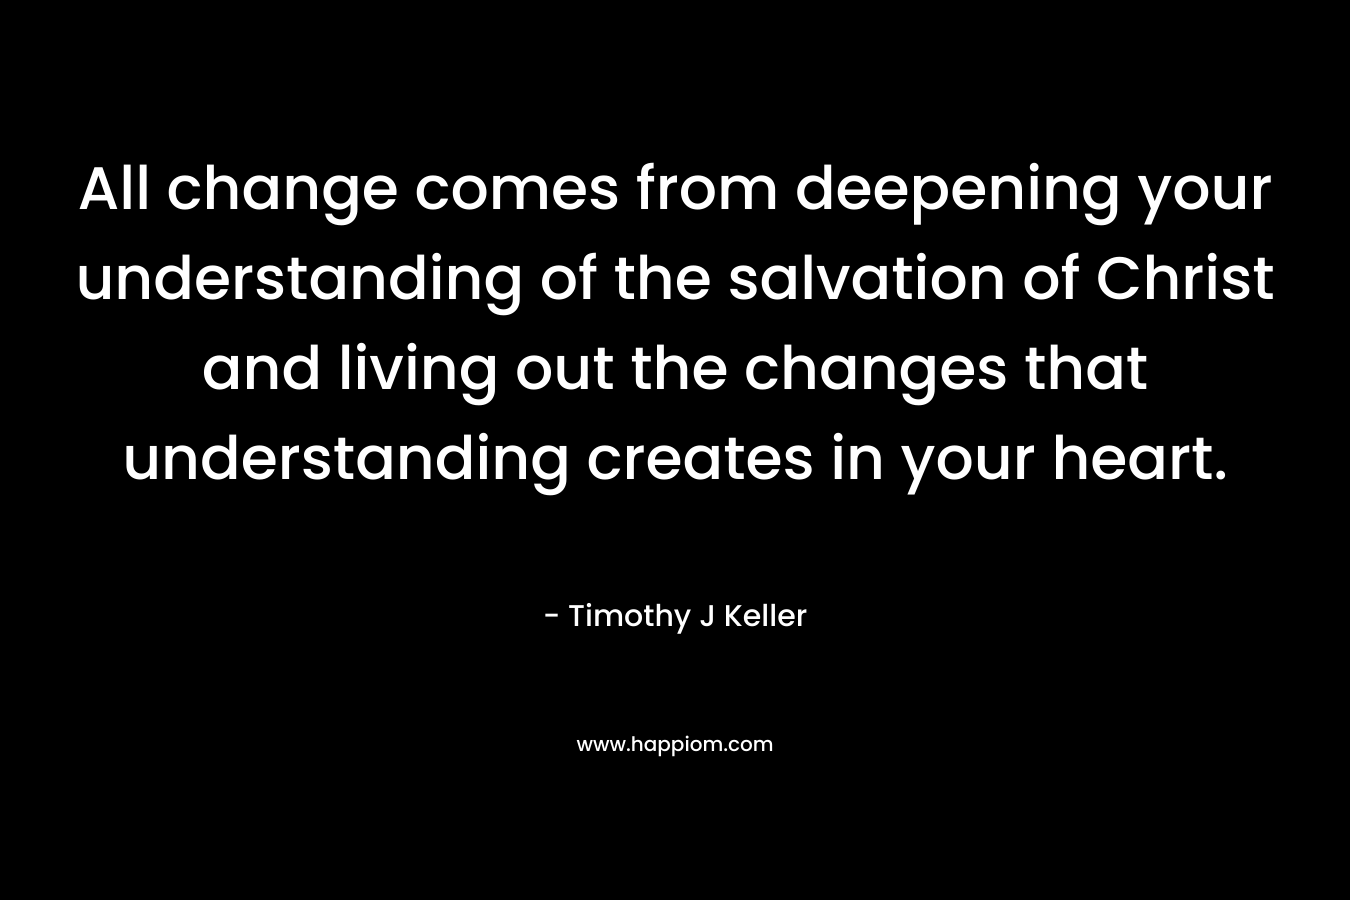 All change comes from deepening your understanding of the salvation of Christ and living out the changes that understanding creates in your heart. – Timothy J Keller